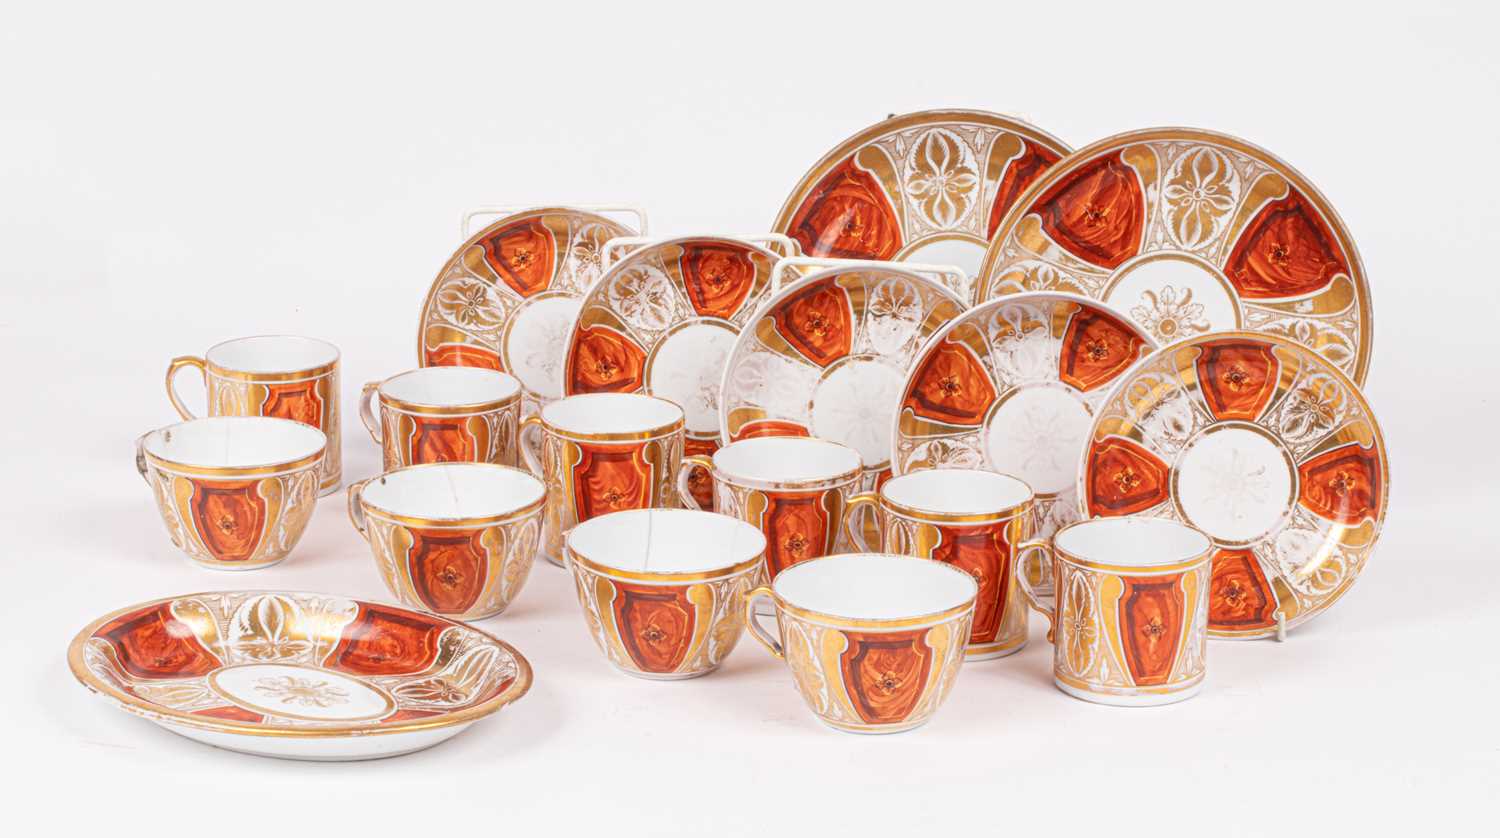 An English porcelain part tea and coffee service